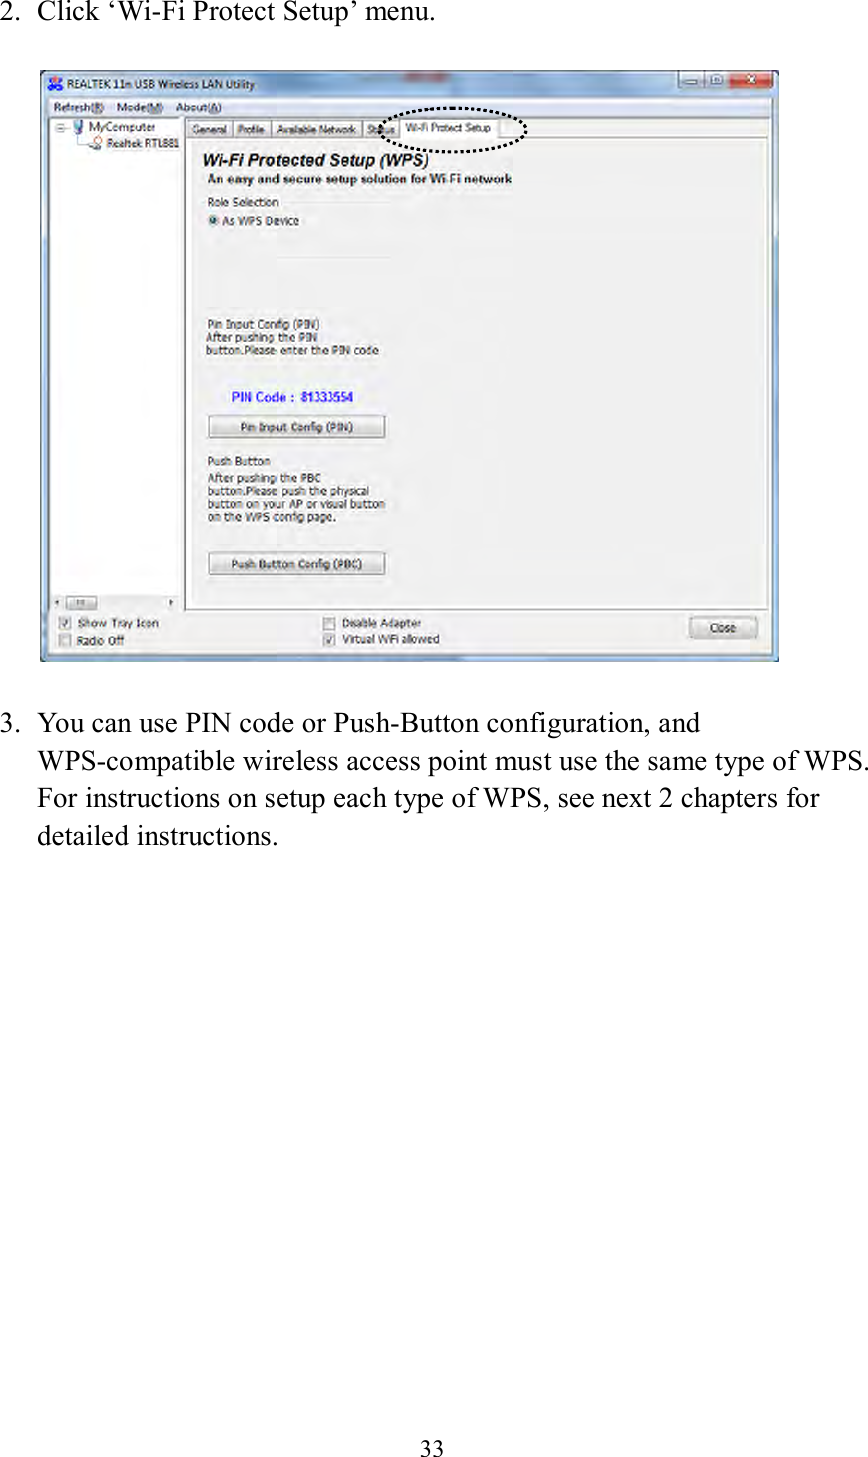 33  2. Click ‘Wi-Fi Protect Setup’ menu.     3. You can use PIN code or Push-Button configuration, and WPS-compatible wireless access point must use the same type of WPS. For instructions on setup each type of WPS, see next 2 chapters for detailed instructions.       